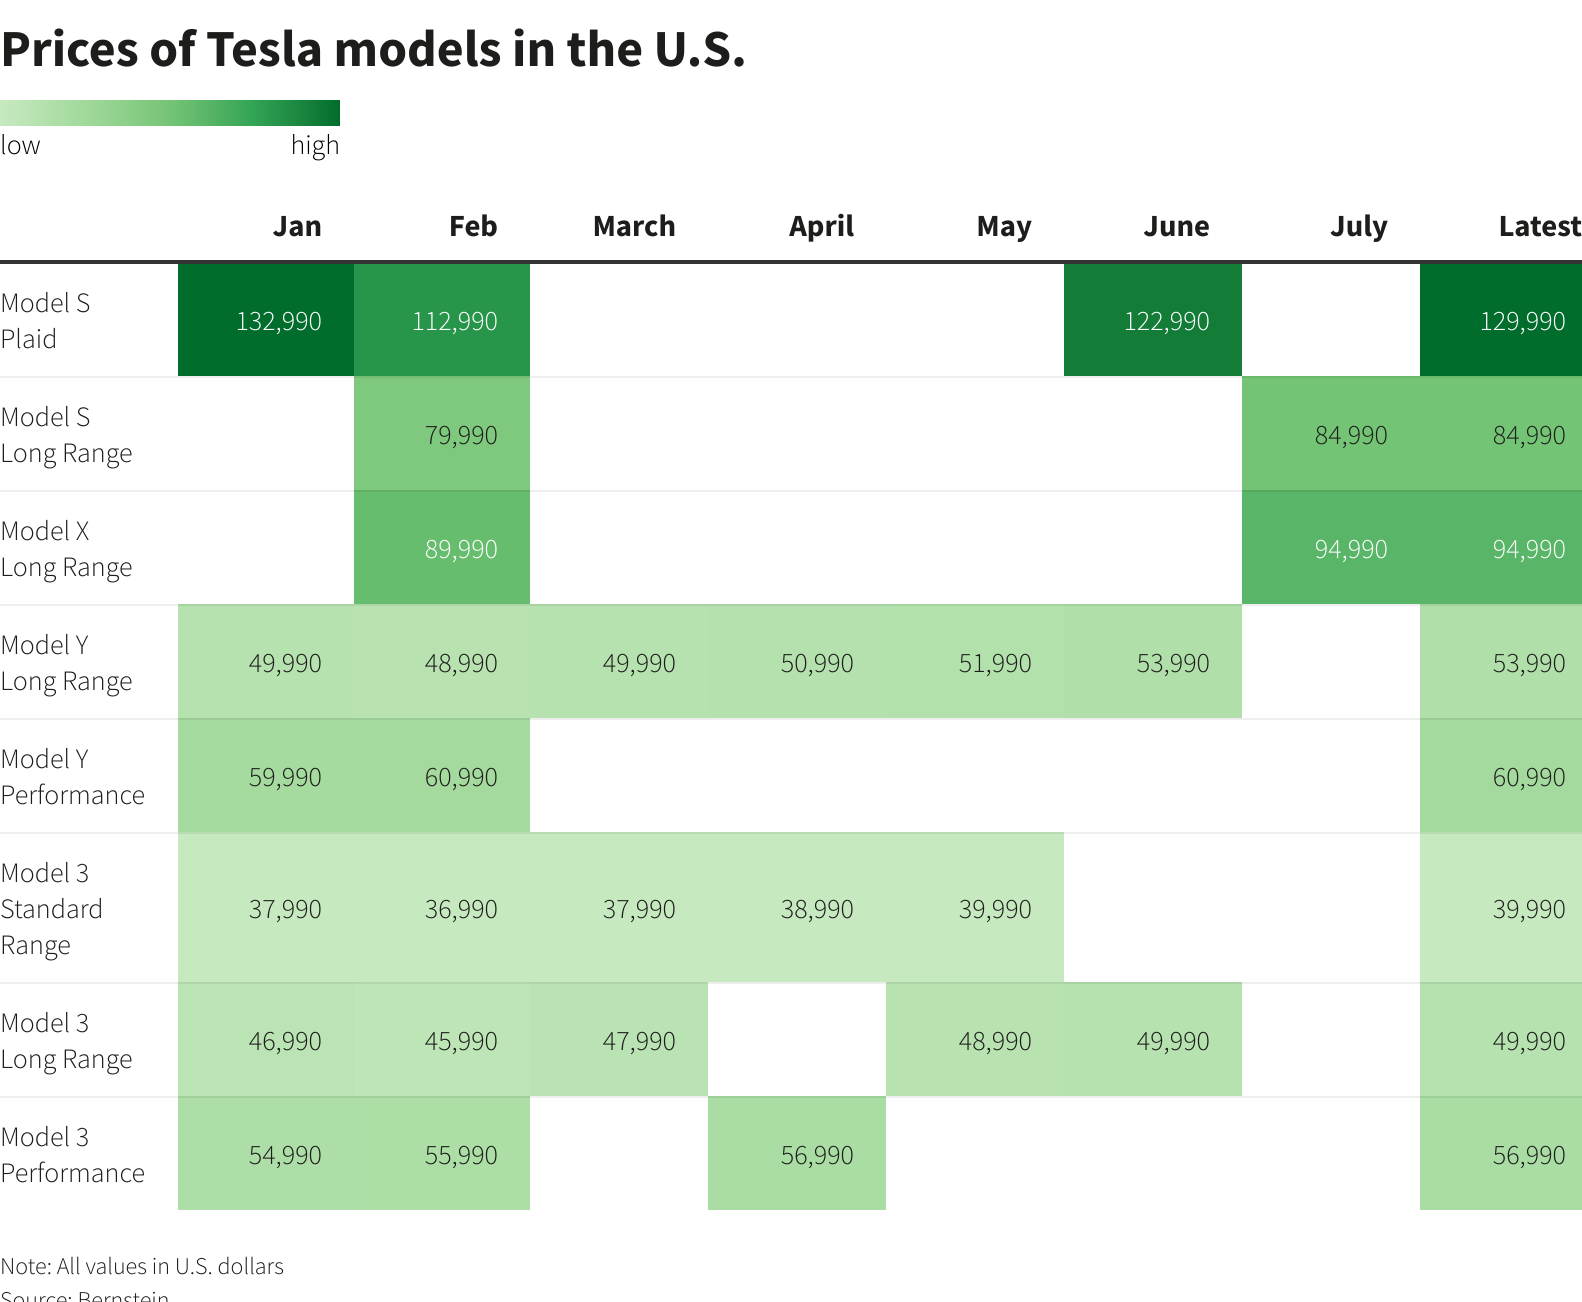 Prices of Tesla models in the U.S